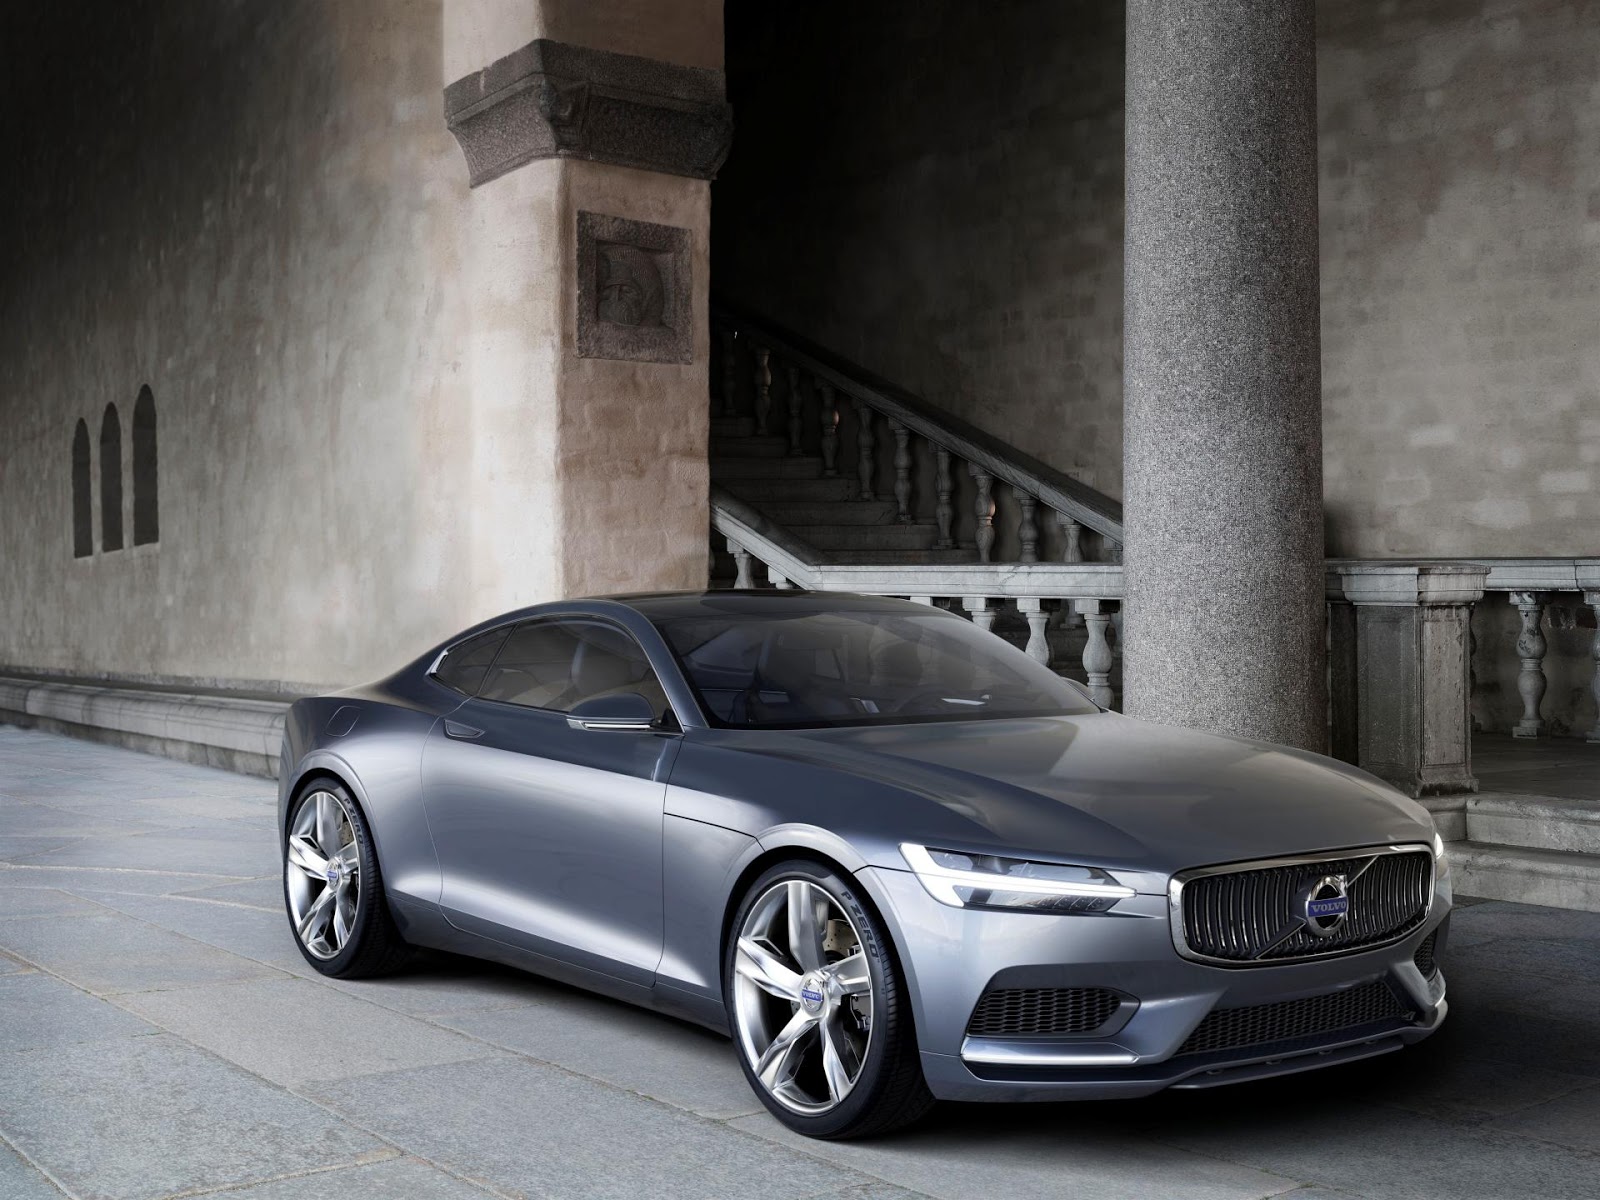 Volvo Coupe Concept 2013 | Hottest Car Wallpapers | Bestgarage